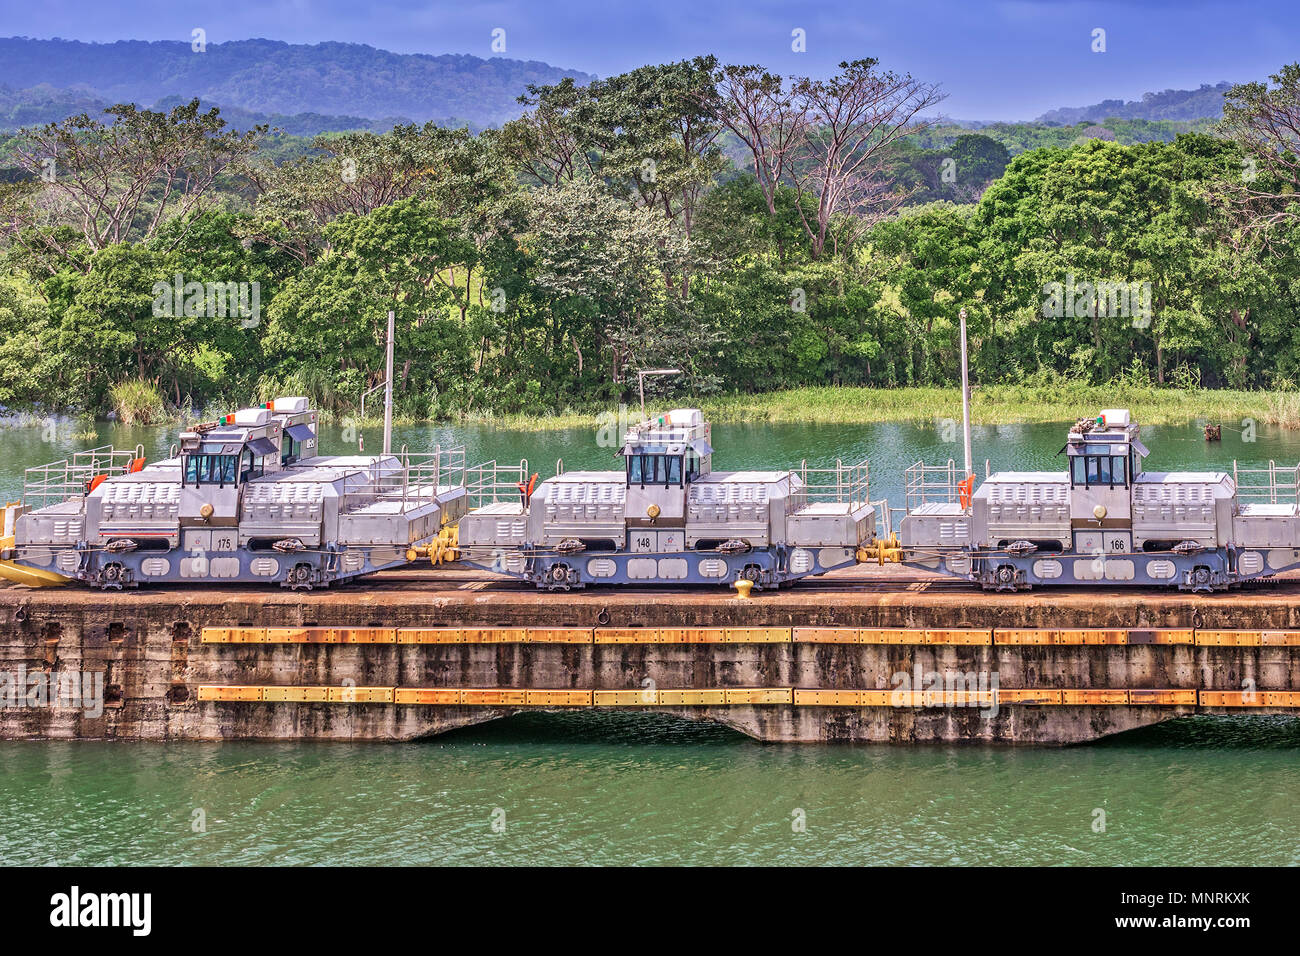 Parked Mules On The Panama Canal, Panama, Central America Stock Photo